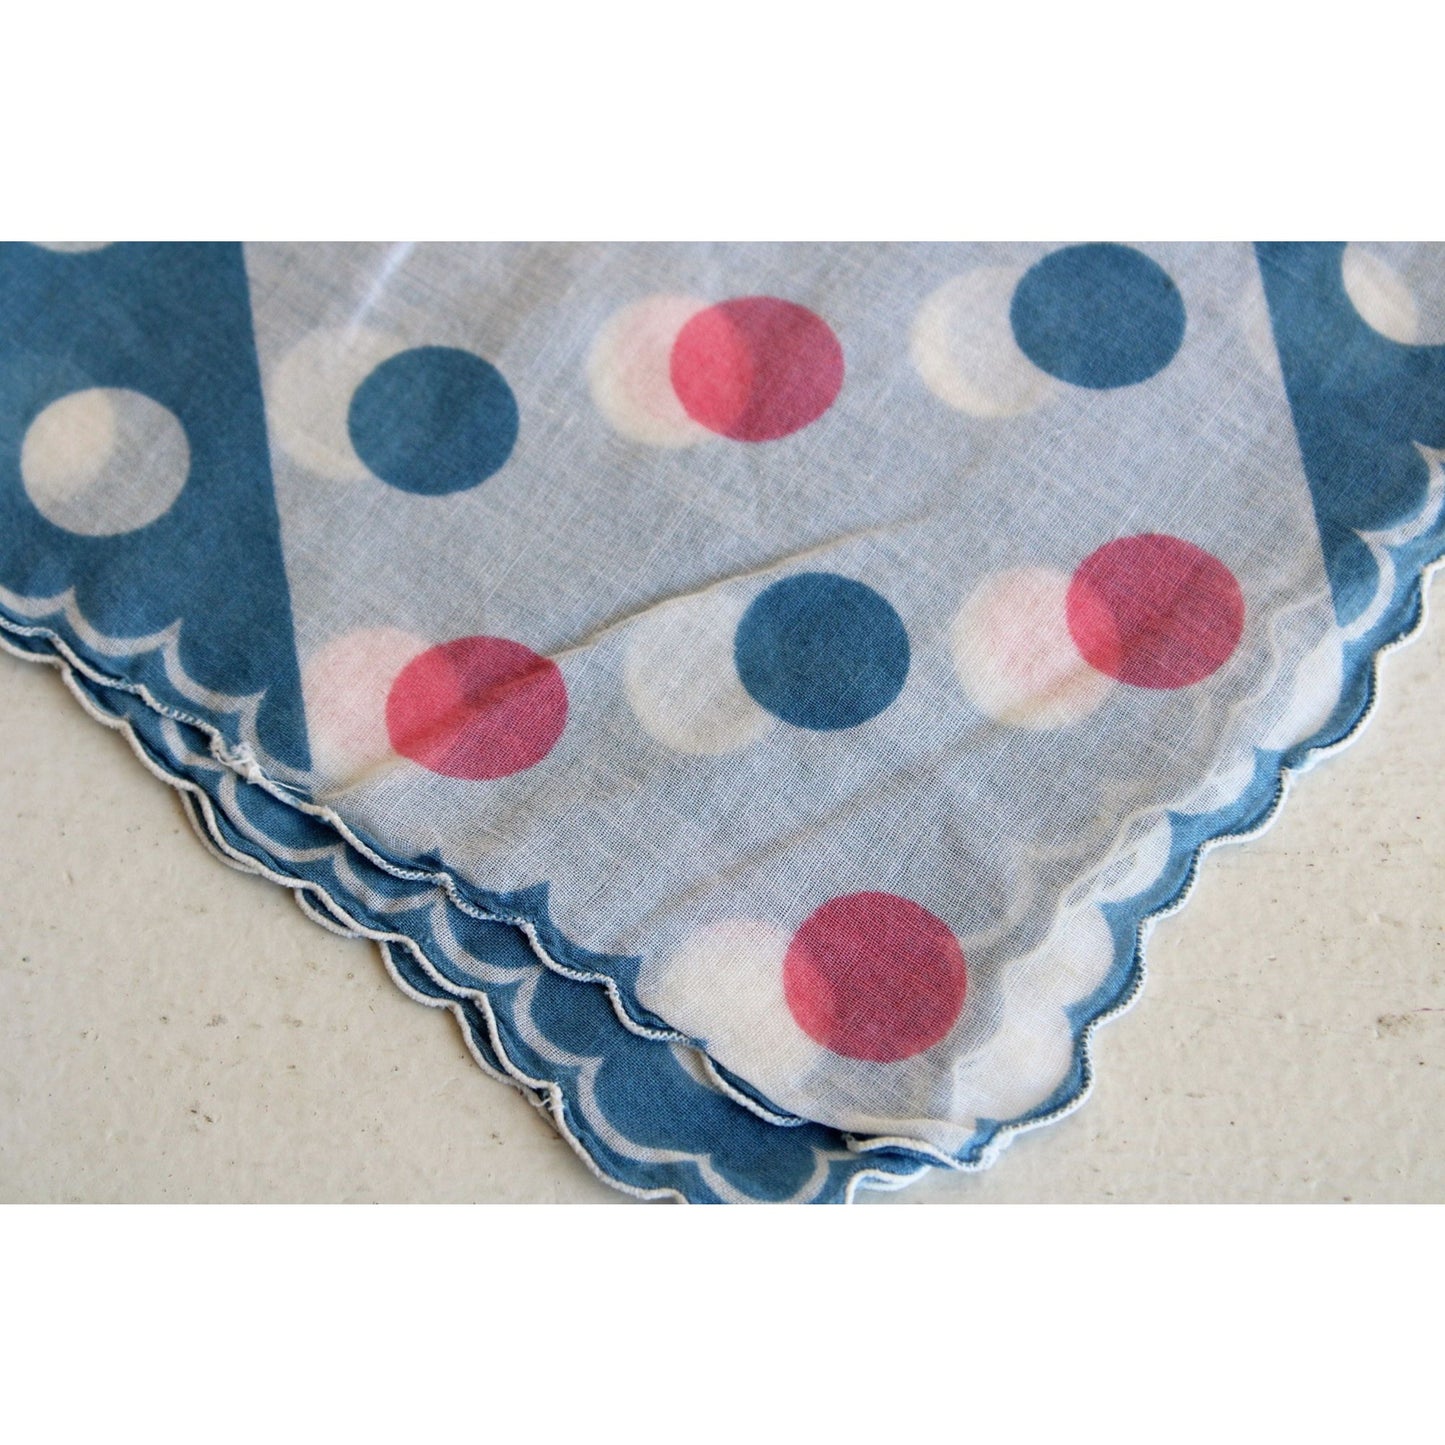 Vintage Cotton Blue and Pink Polkadots Hanky